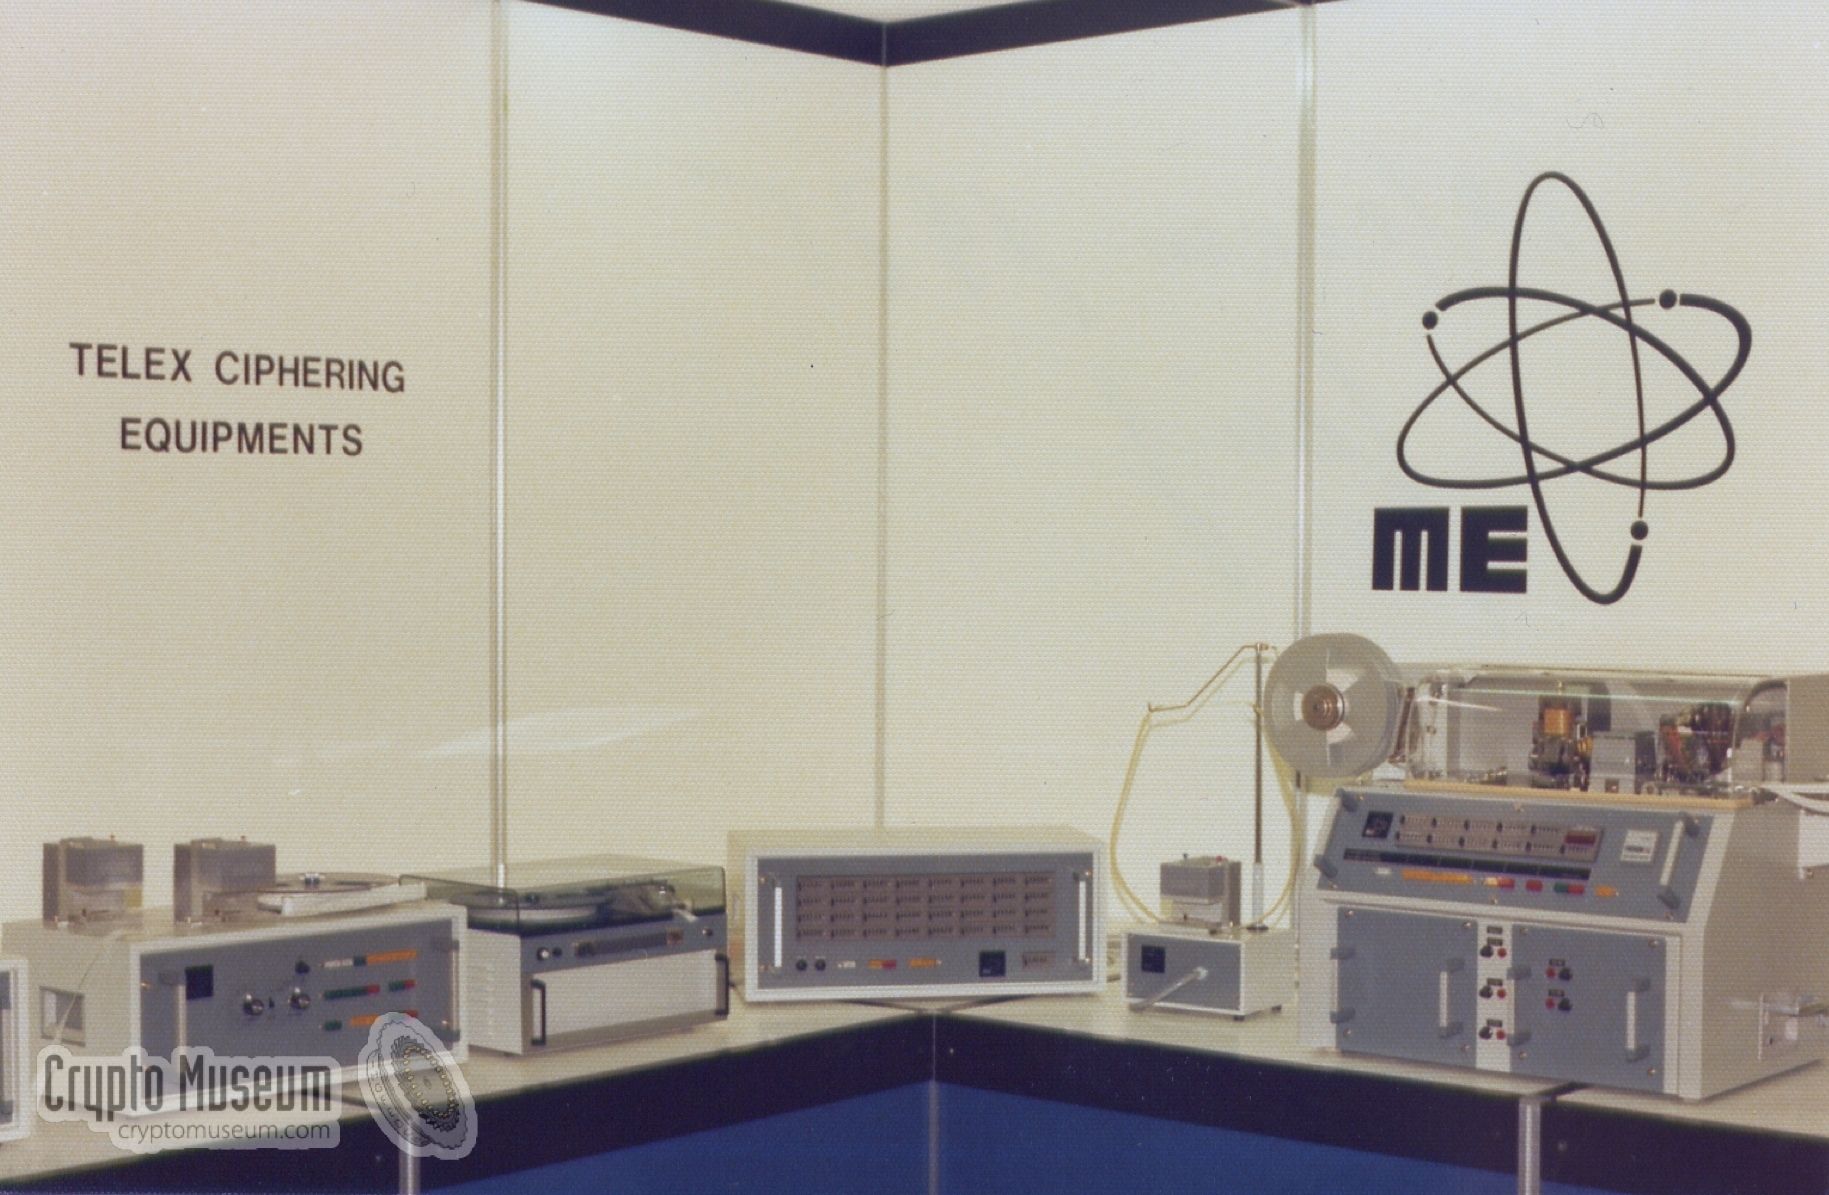 The Mils Elektronik stand at the Telecom conference in Geneva in 1975. Photograph by Eberhard Scholz [1].